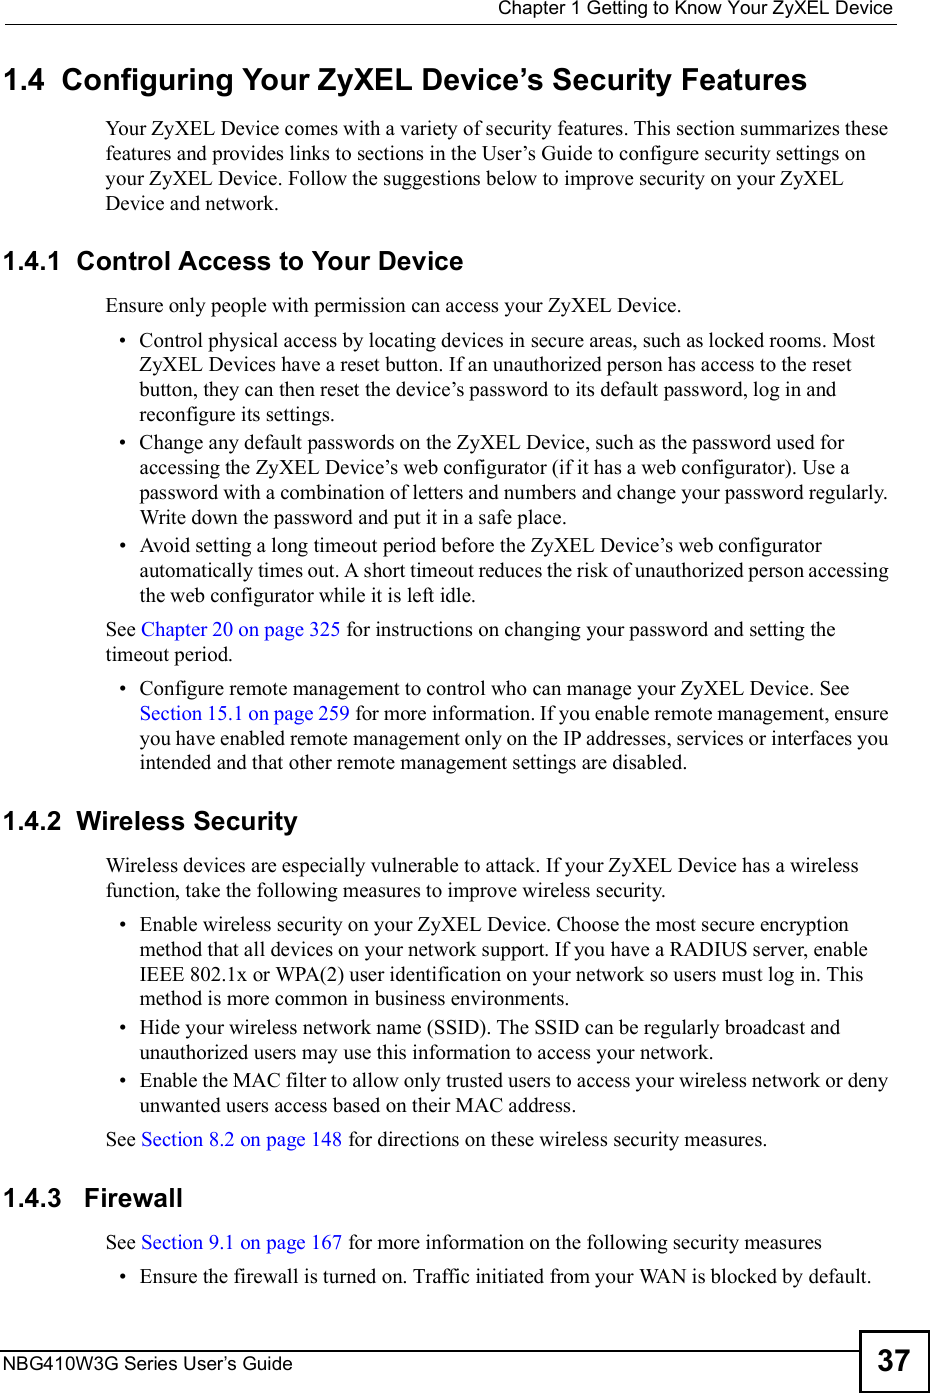  Chapter 1Getting to Know Your ZyXEL DeviceNBG410W3G Series User s Guide 371.4  Configuring Your ZyXEL Device s Security FeaturesYour ZyXEL Device comes with a variety of security features. This section summarizes these features and provides links to sections in the User!s Guide to configure security settings on your ZyXEL Device. Follow the suggestions below to improve security on your ZyXEL Device and network.  1.4.1  Control Access to Your DeviceEnsure only people with permission can access your ZyXEL Device. Control physical access by locating devices in secure areas, such as locked rooms. Most ZyXEL Devices have a reset button. If an unauthorized person has access to the reset button, they can then reset the device!s password to its default password, log in and reconfigure its settings. Change any default passwords on the ZyXEL Device, such as the password used for accessing the ZyXEL Device!s web configurator (if it has a web configurator). Use a password with a combination of letters and numbers and change your password regularly. Write down the password and put it in a safe place. Avoid setting a long timeout period before the ZyXEL Device!s web configurator automatically times out. A short timeout reduces the risk of unauthorized person accessing the web configurator while it is left idle. See Chapter 20 on page 325 for instructions on changing your password and setting the timeout period. Configure remote management to control who can manage your ZyXEL Device. See Section 15.1 on page 259 for more information. If you enable remote management, ensure you have enabled remote management only on the IP addresses, services or interfaces you intended and that other remote management settings are disabled.1.4.2  Wireless Security Wireless devices are especially vulnerable to attack. If your ZyXEL Device has a wireless function, take the following measures to improve wireless security. Enable wireless security on your ZyXEL Device. Choose the most secure encryption method that all devices on your network support. If you have a RADIUS server, enable IEEE 802.1x or WPA(2) user identification on your network so users must log in. This method is more common in business environments.    Hide your wireless network name (SSID). The SSID can be regularly broadcast and unauthorized users may use this information to access your network.   Enable the MAC filter to allow only trusted users to access your wireless network or deny unwanted users access based on their MAC address. See Section 8.2 on page 148 for directions on these wireless security measures.1.4.3   FirewallSee Section 9.1 on page 167 for more information on the following security measures  Ensure the firewall is turned on. Traffic initiated from your WAN is blocked by default.  